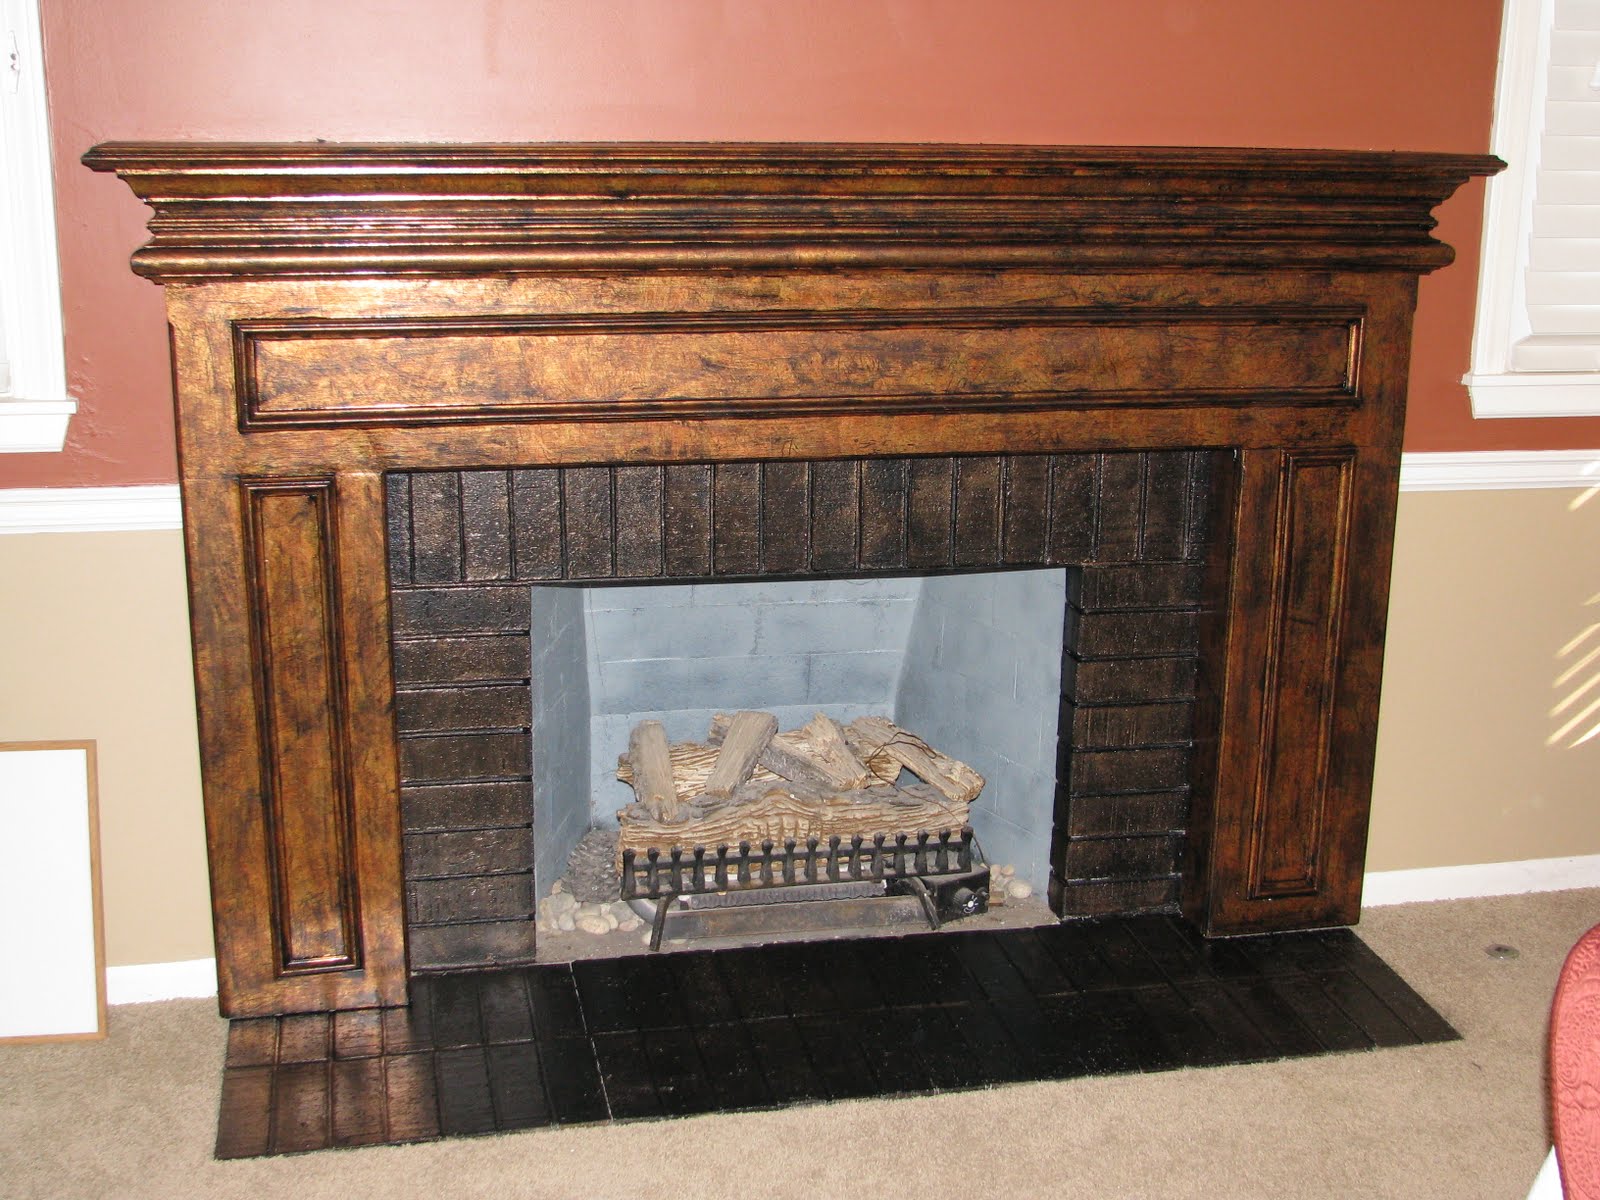 Foiled fireplace